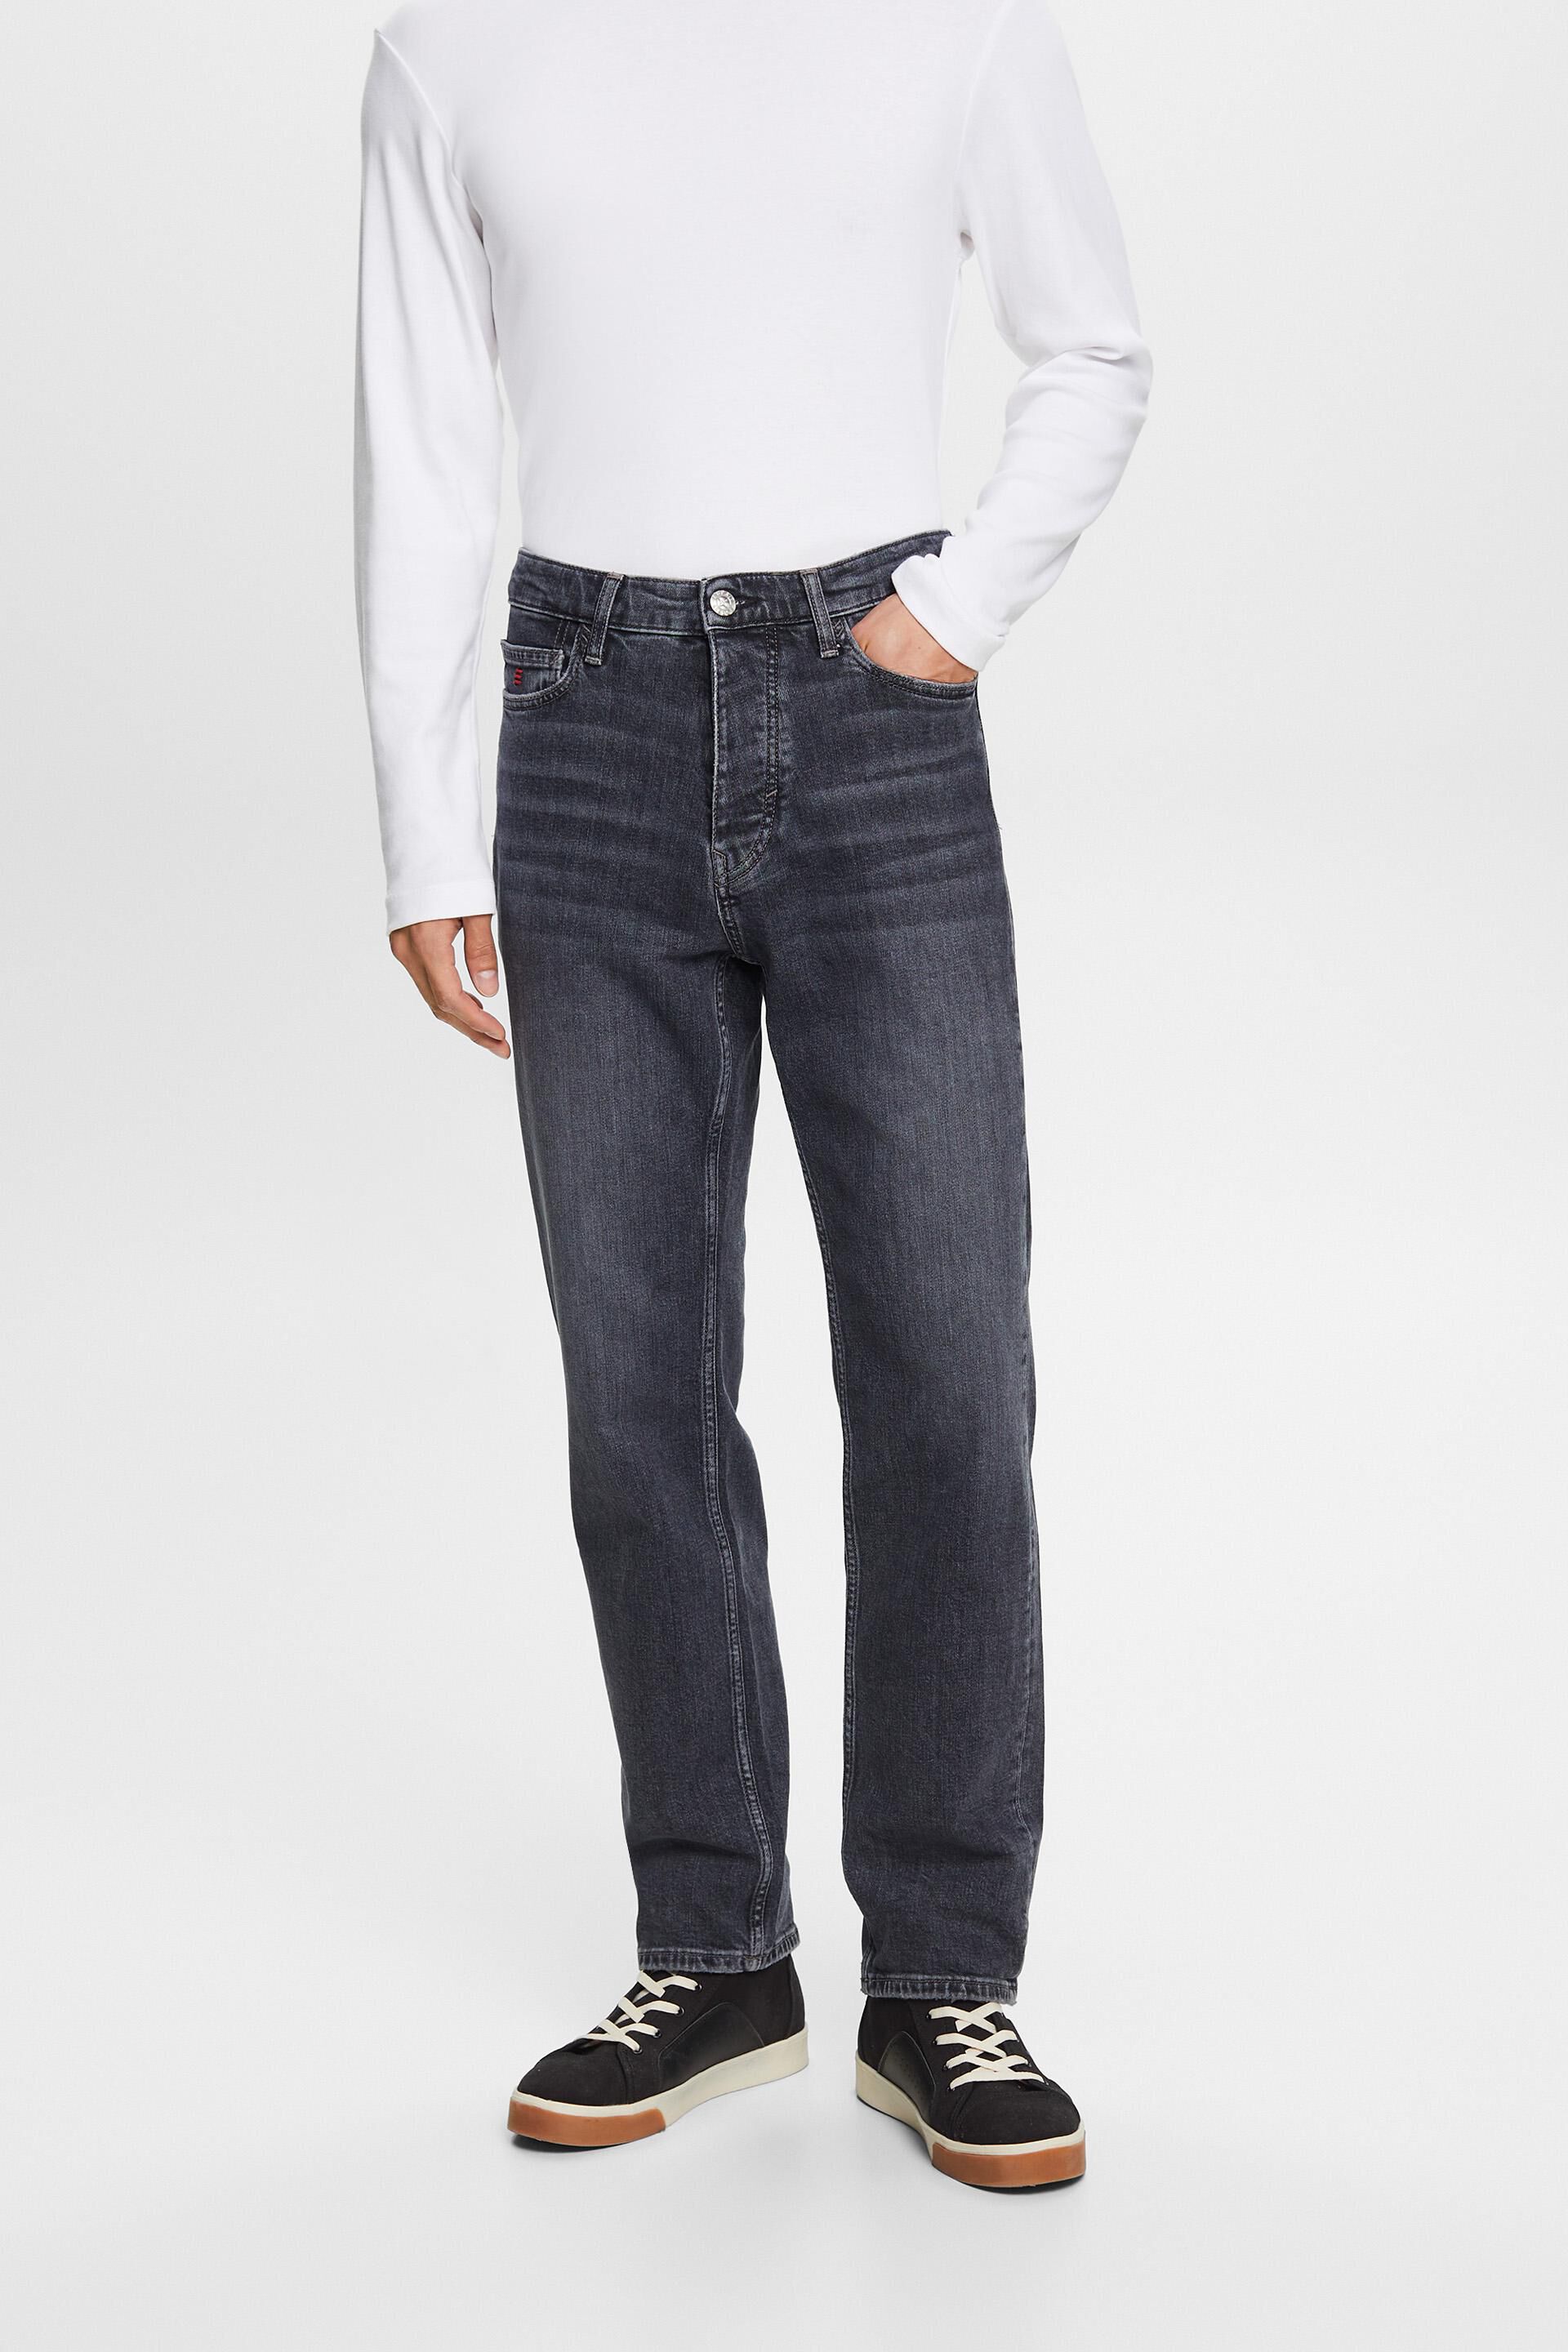 Esprit Jeans Straight-Leg Relaxed